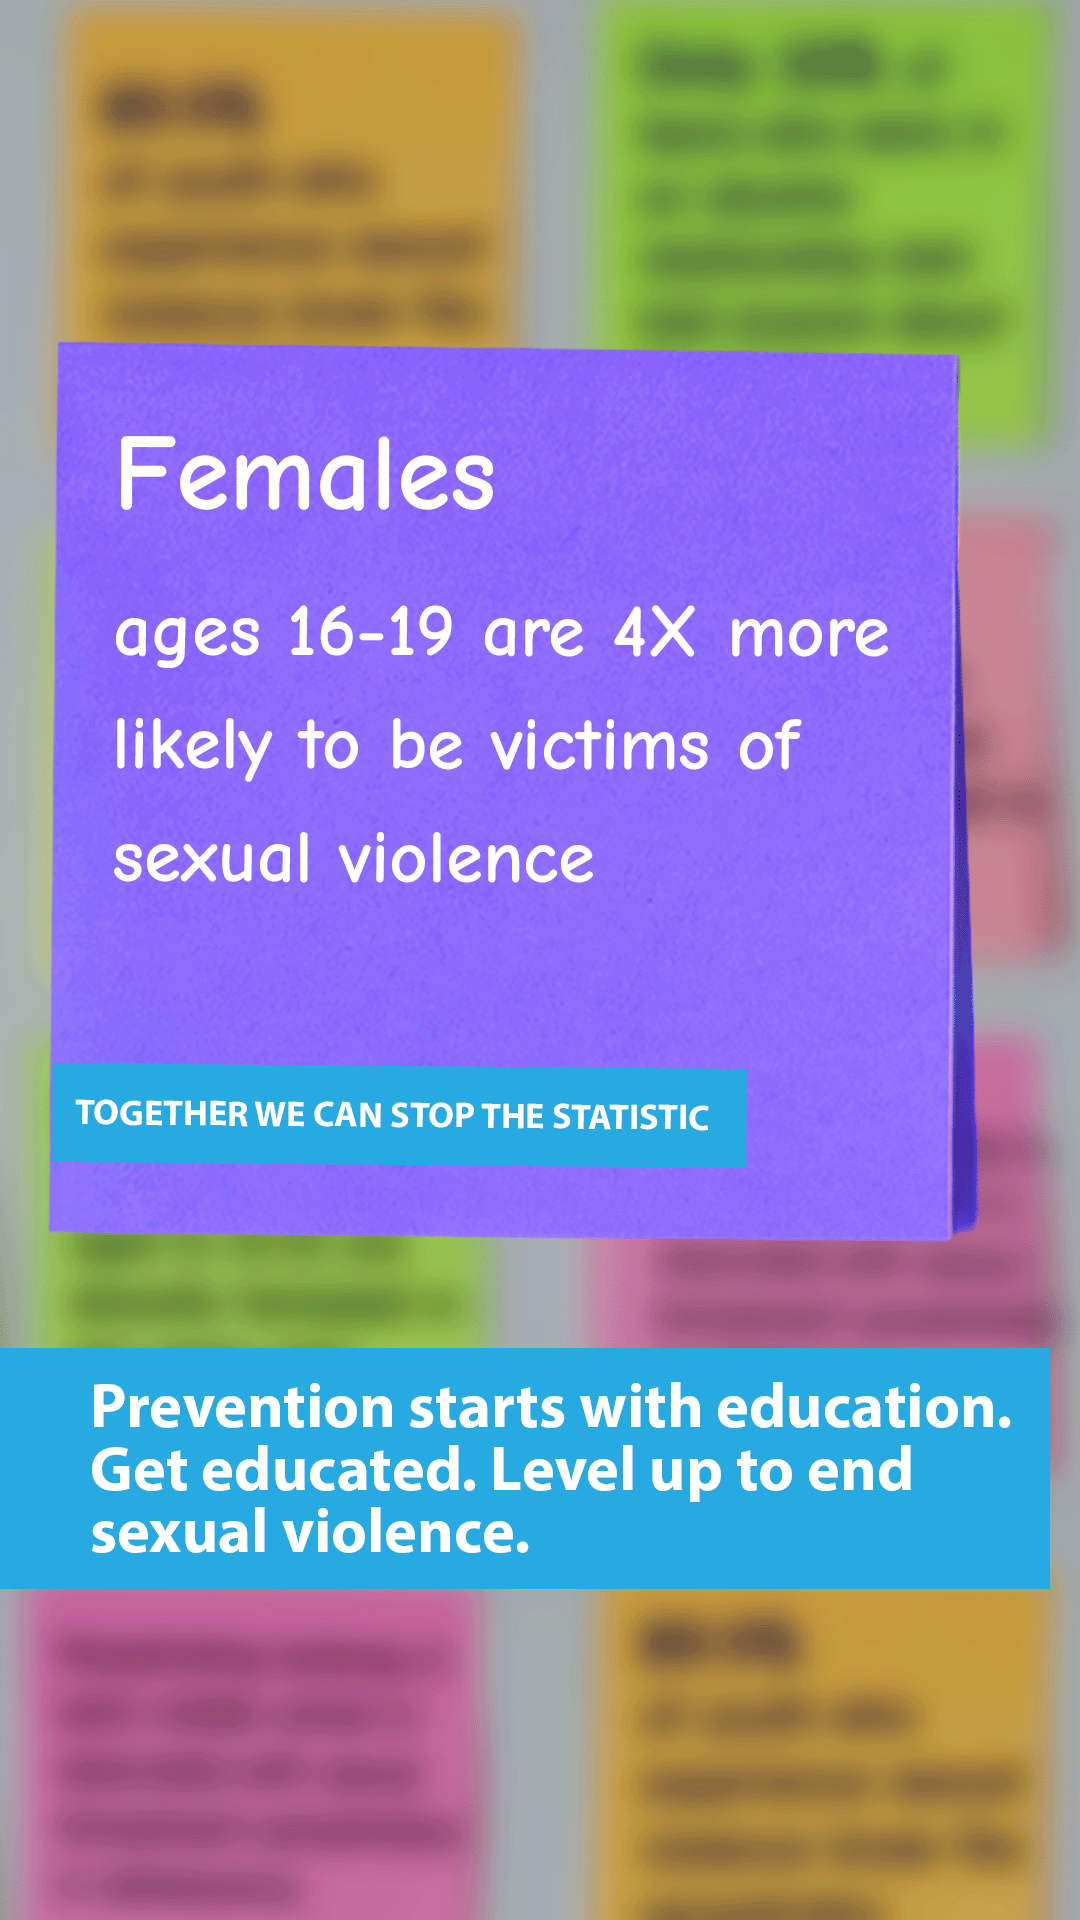 image with blurred sticky notes and text that says 'Females ages 16-19 are 4x more likely to be victims of sexual violence. Together we can stop the statistic. Prevention starts with education. Get educated. Level up to end sexual violence.'